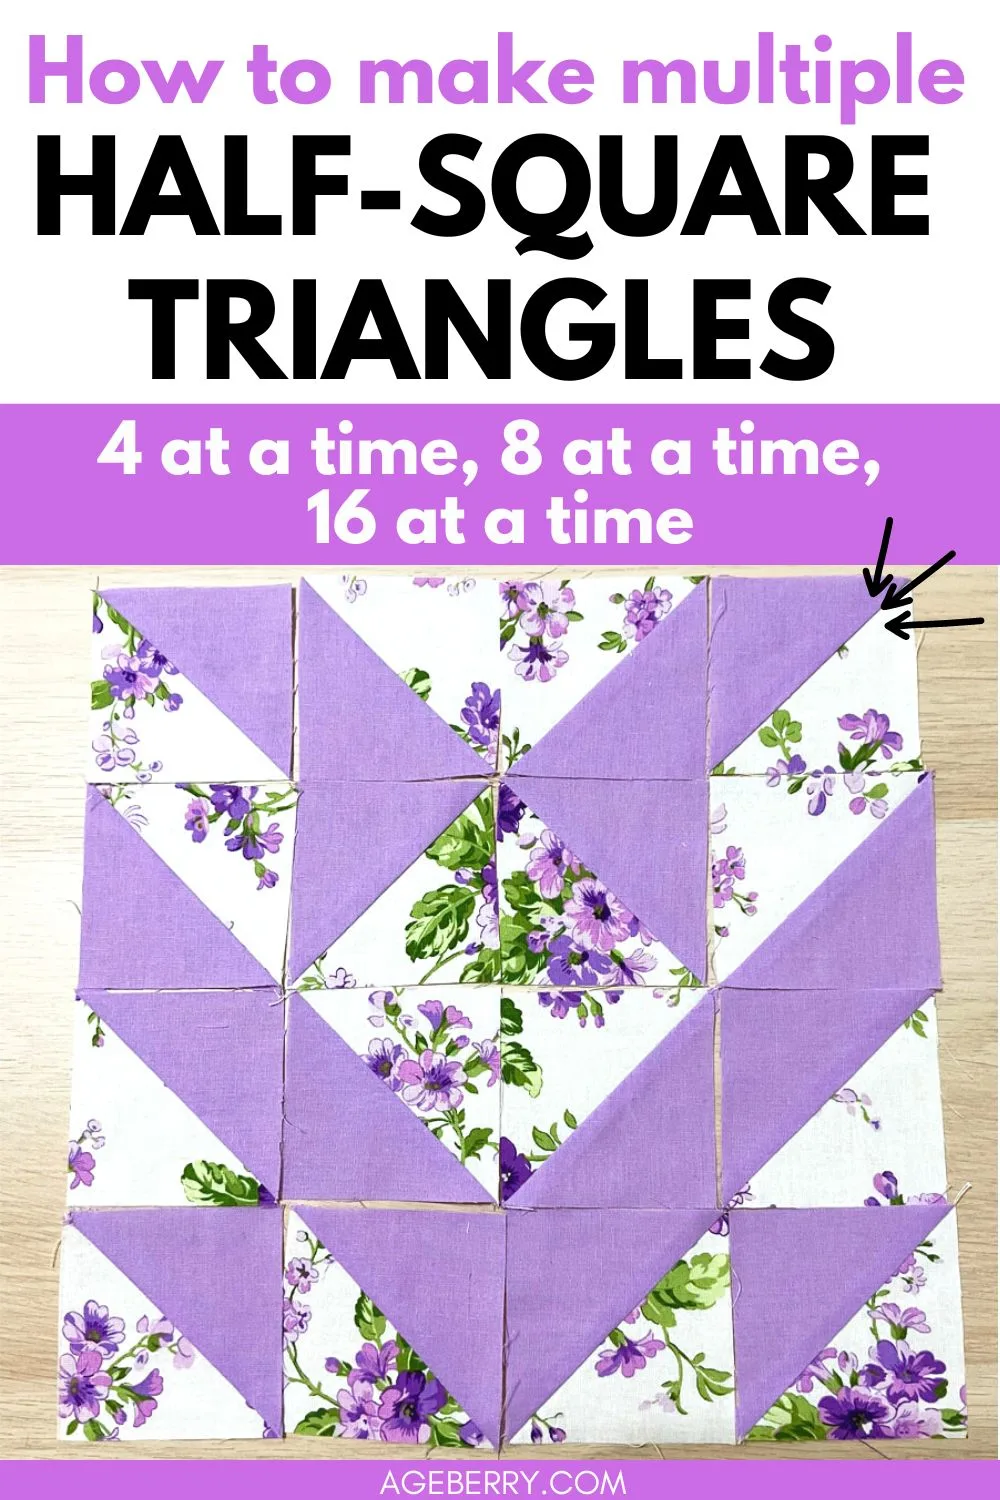 How to make multiple half square triangle tutorial